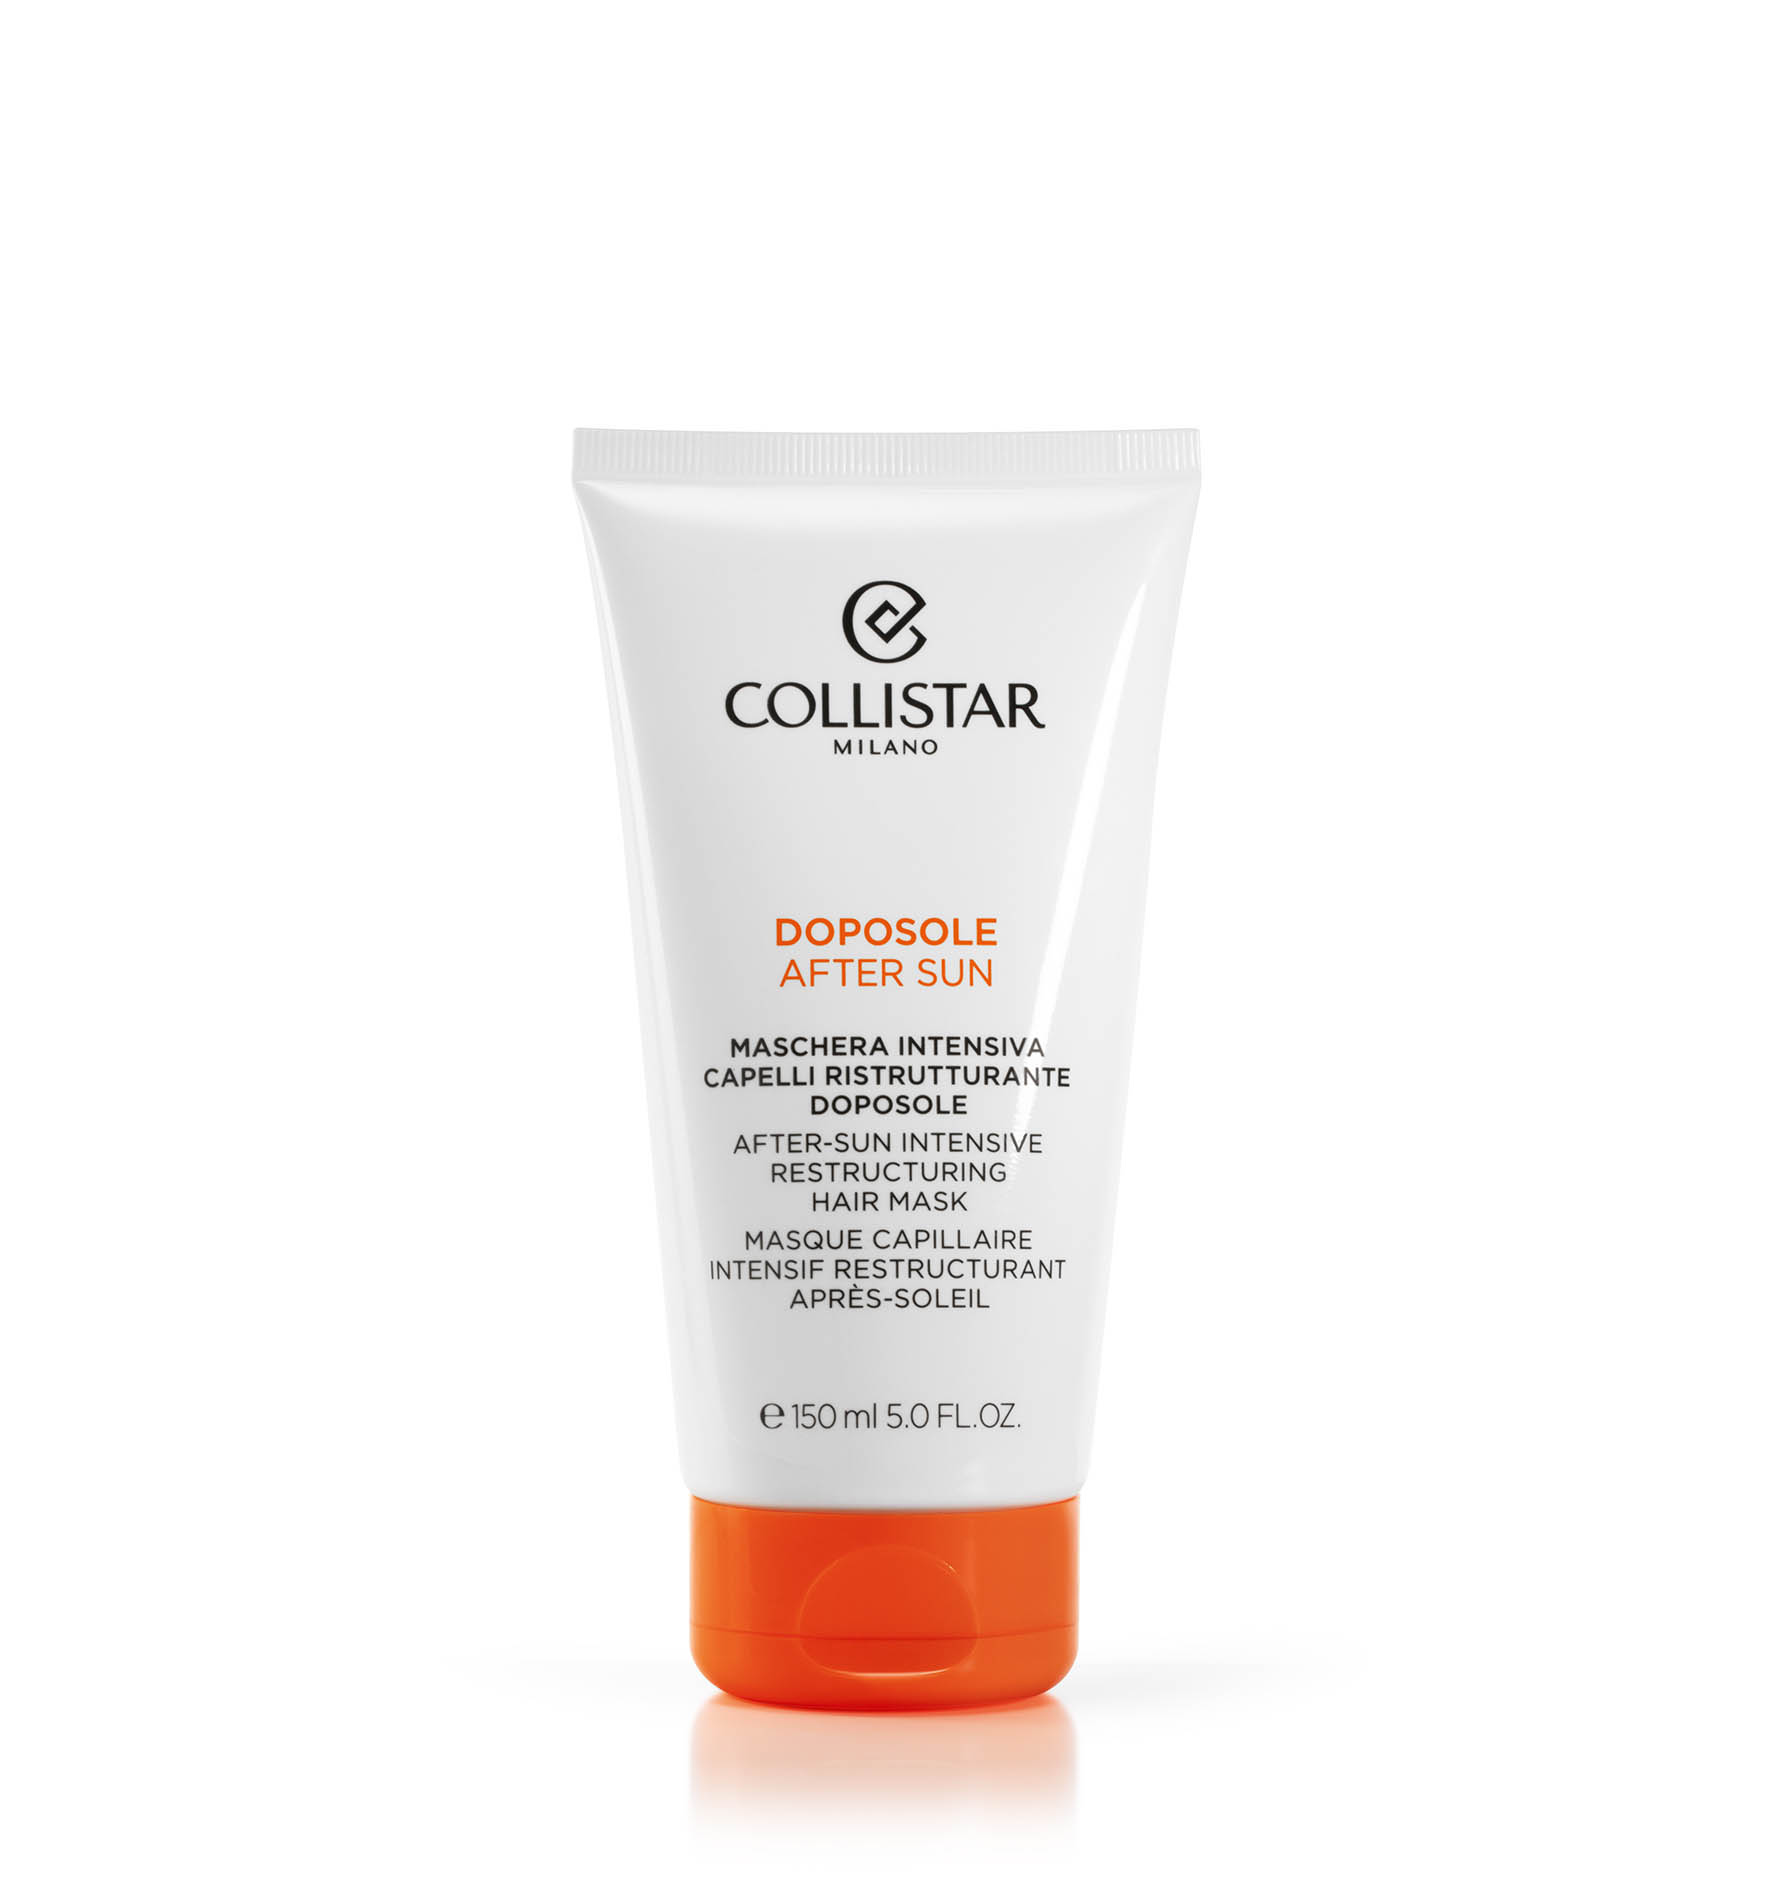 AFTER-SUN INTENSIVE RESTRUCTURING HAIR MASK - NEED | Collistar - Shop Online Ufficiale